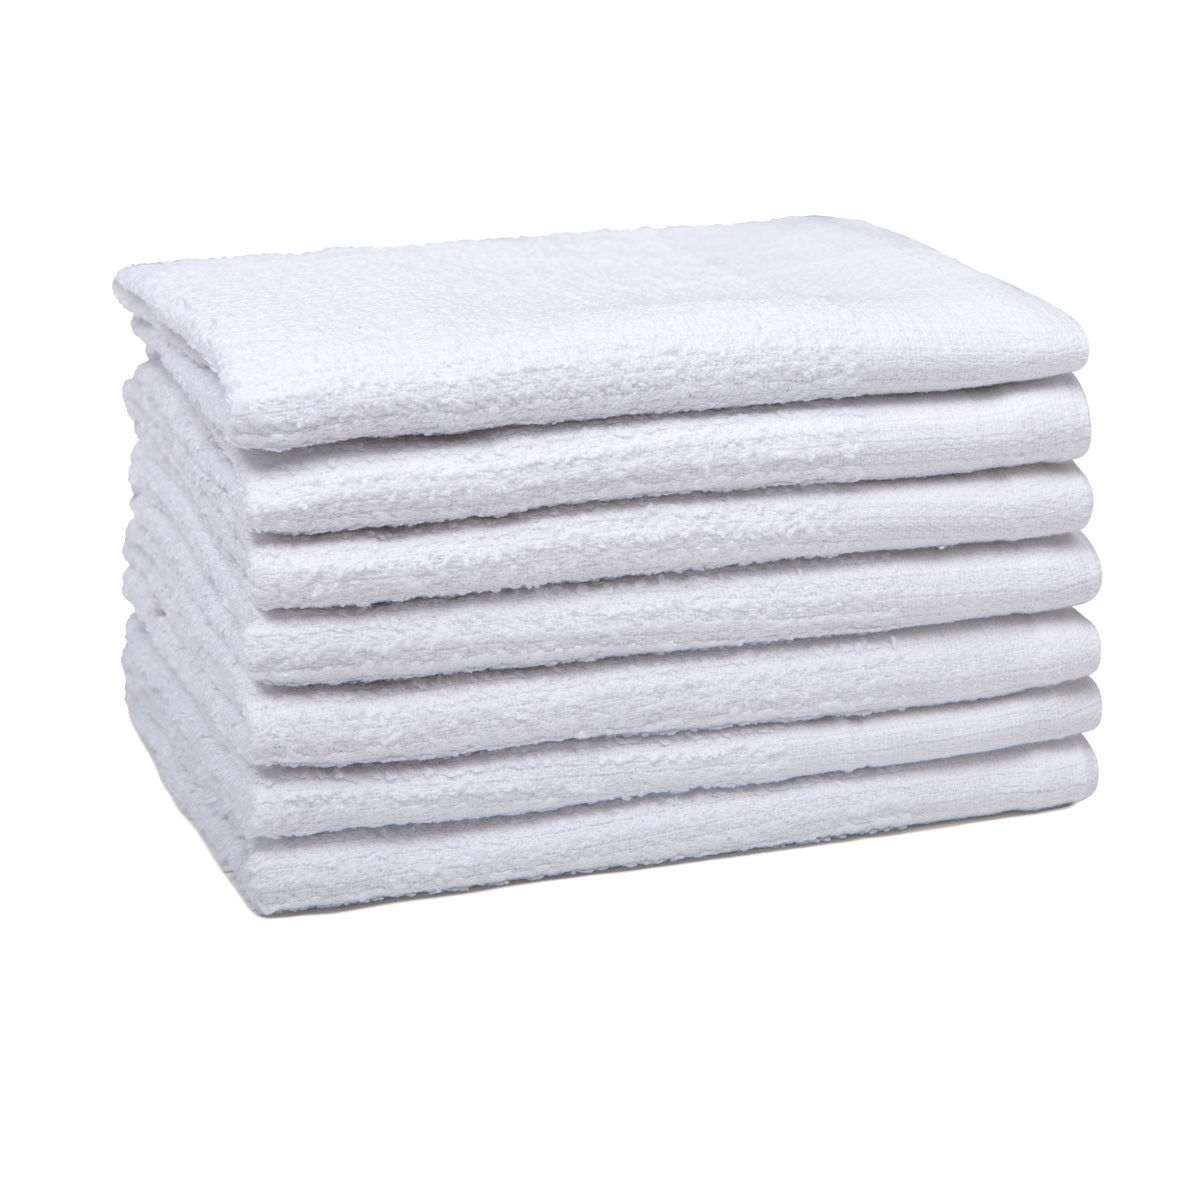 What material are the Wholesale Bar Mop Towels made of?